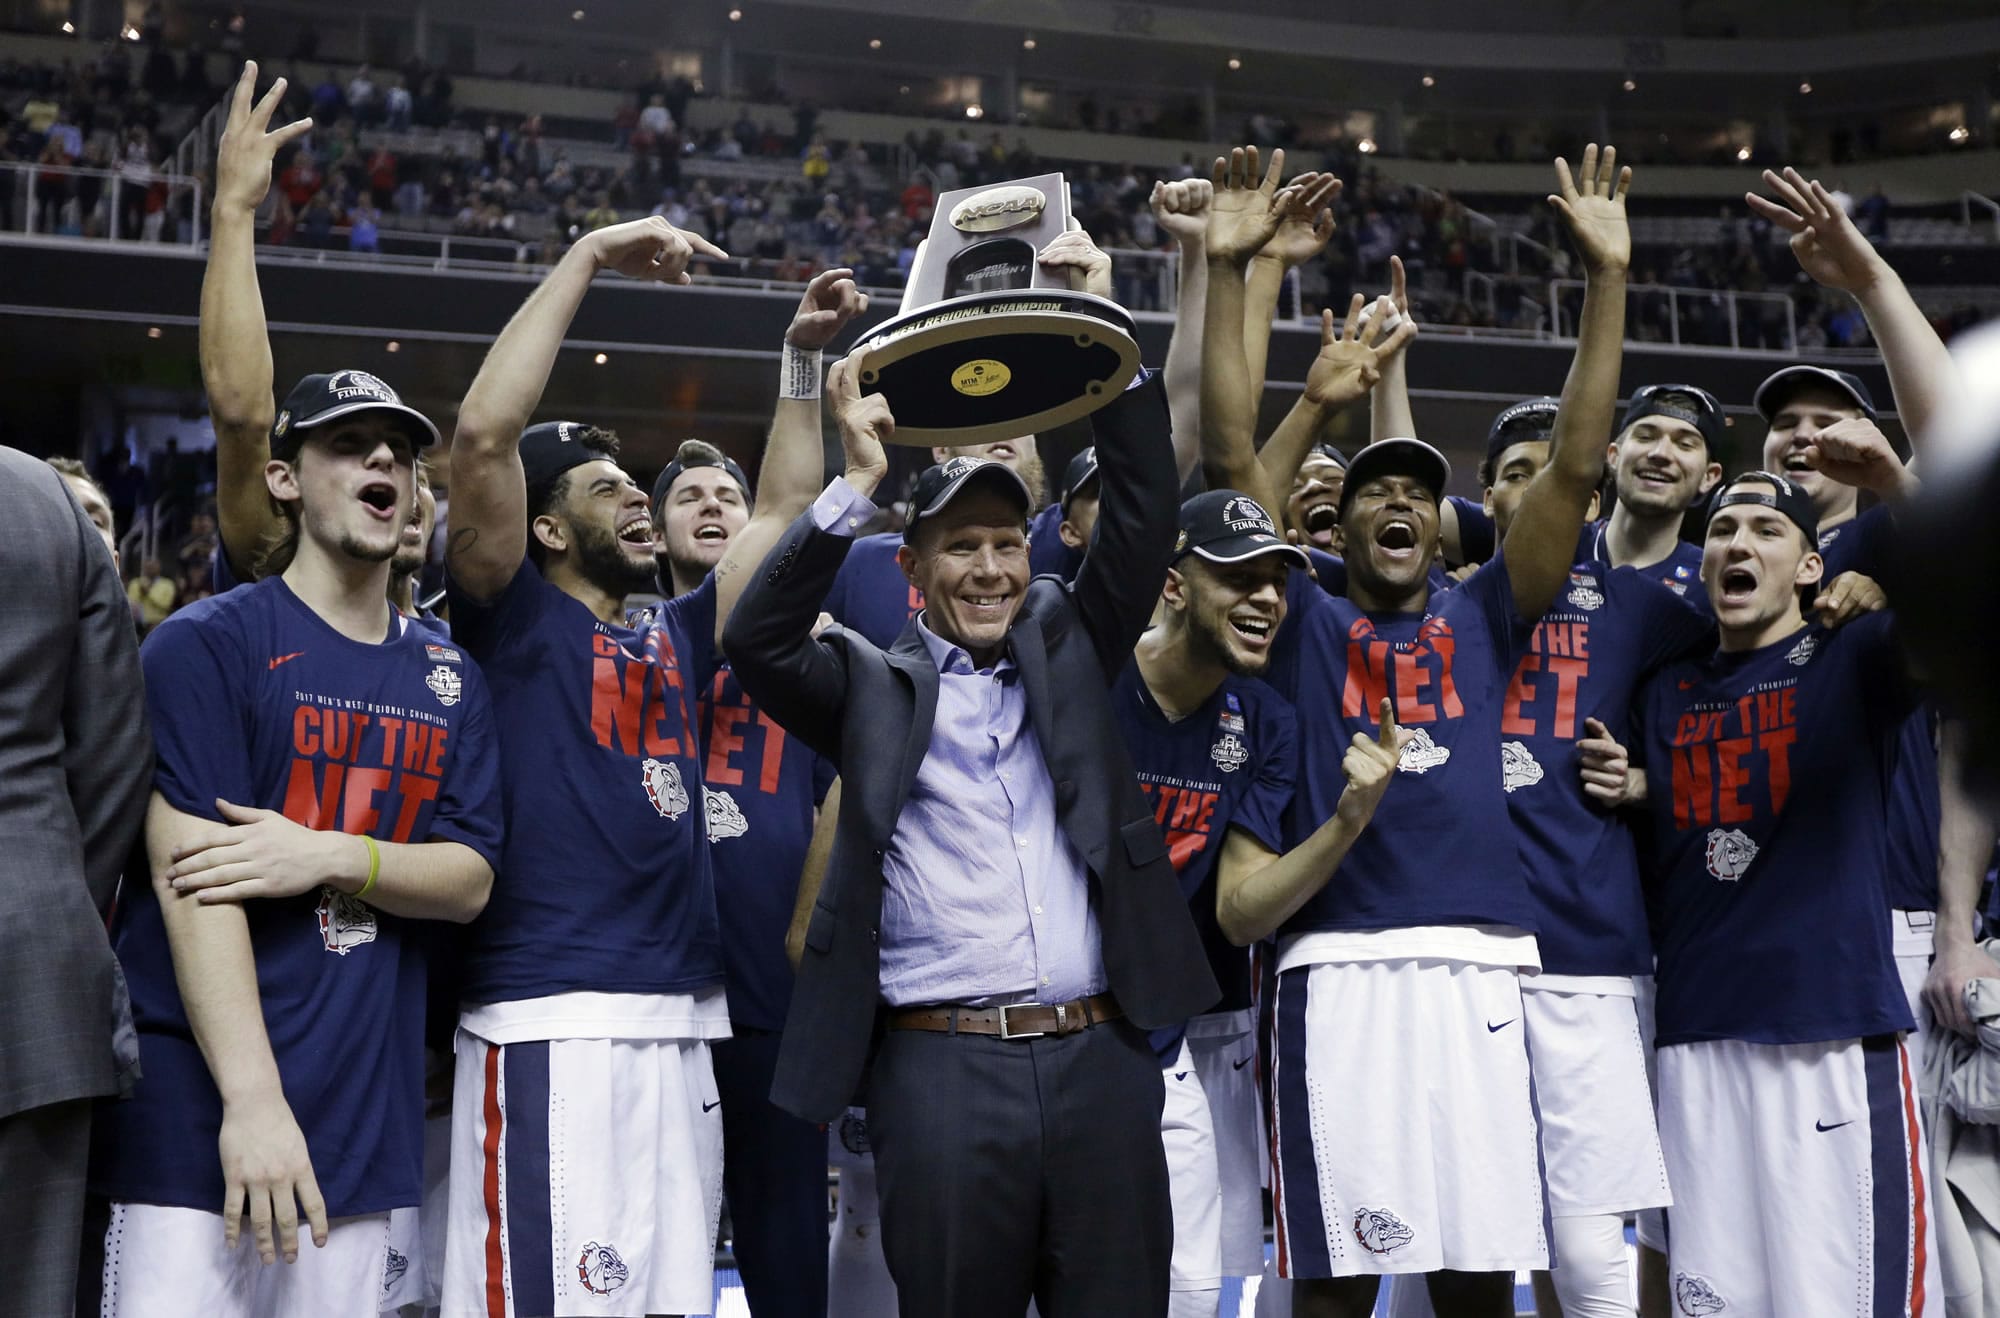 Gonzaga head coach Mark Few, center, holds a trophy as his players surround him after a win over Xavier in an NCAA Tournament college basketball regional final game Saturday, March 25, 2017, in San Jose, Calif.